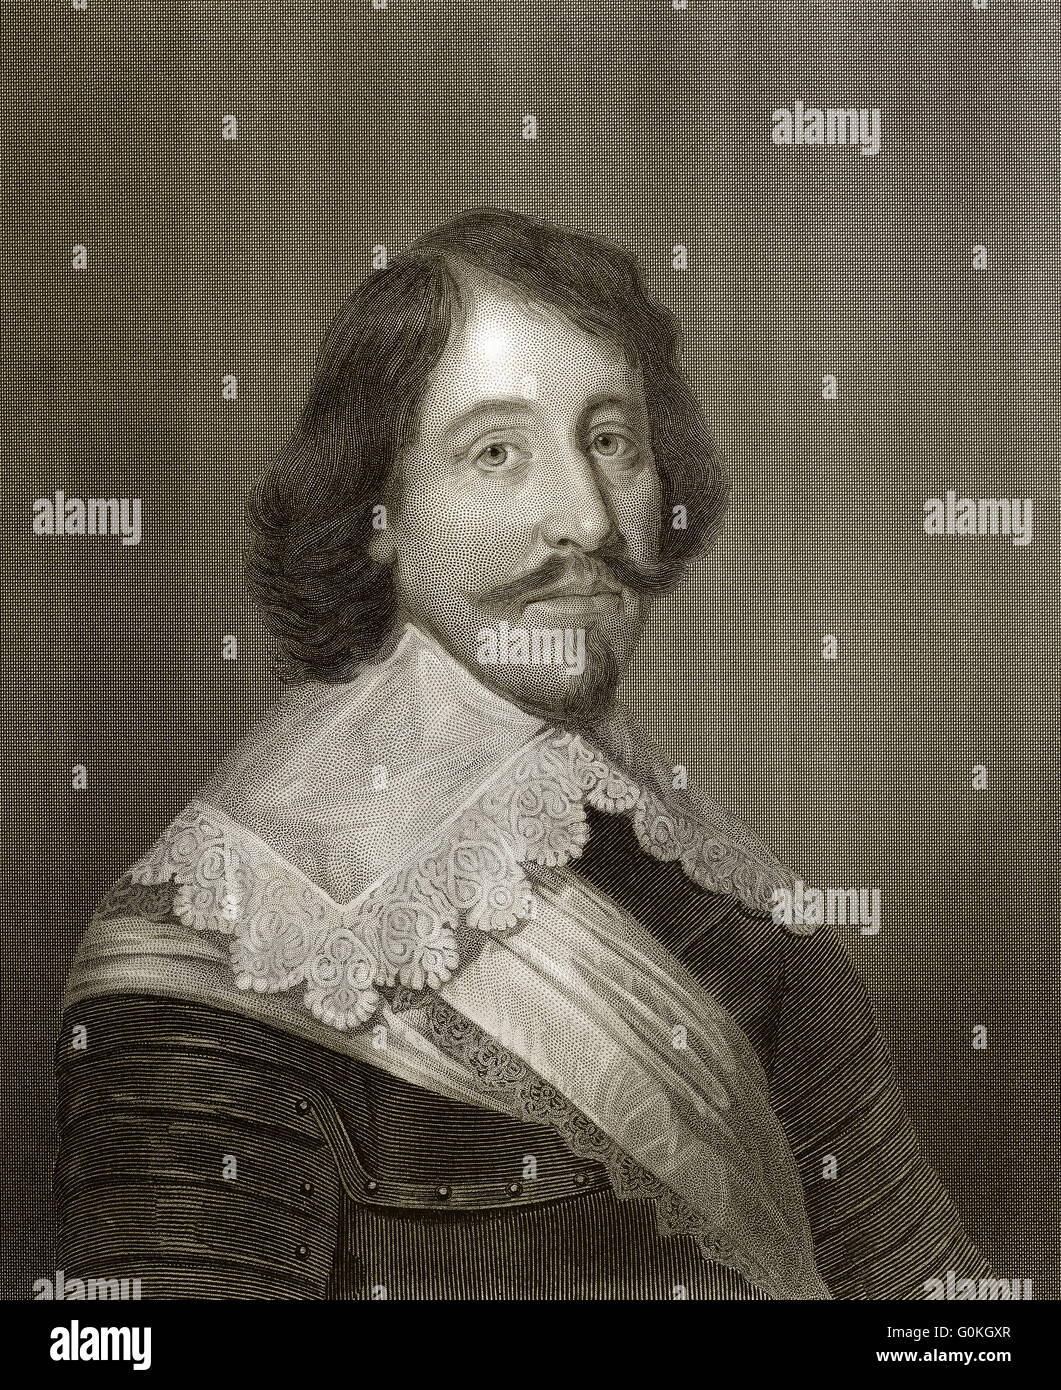 Archibald Campbell, 1st Marquess of Argyll, 8th Earl of Argyll, 1607-1661, the head of government in Scotland during the British Stock Photo